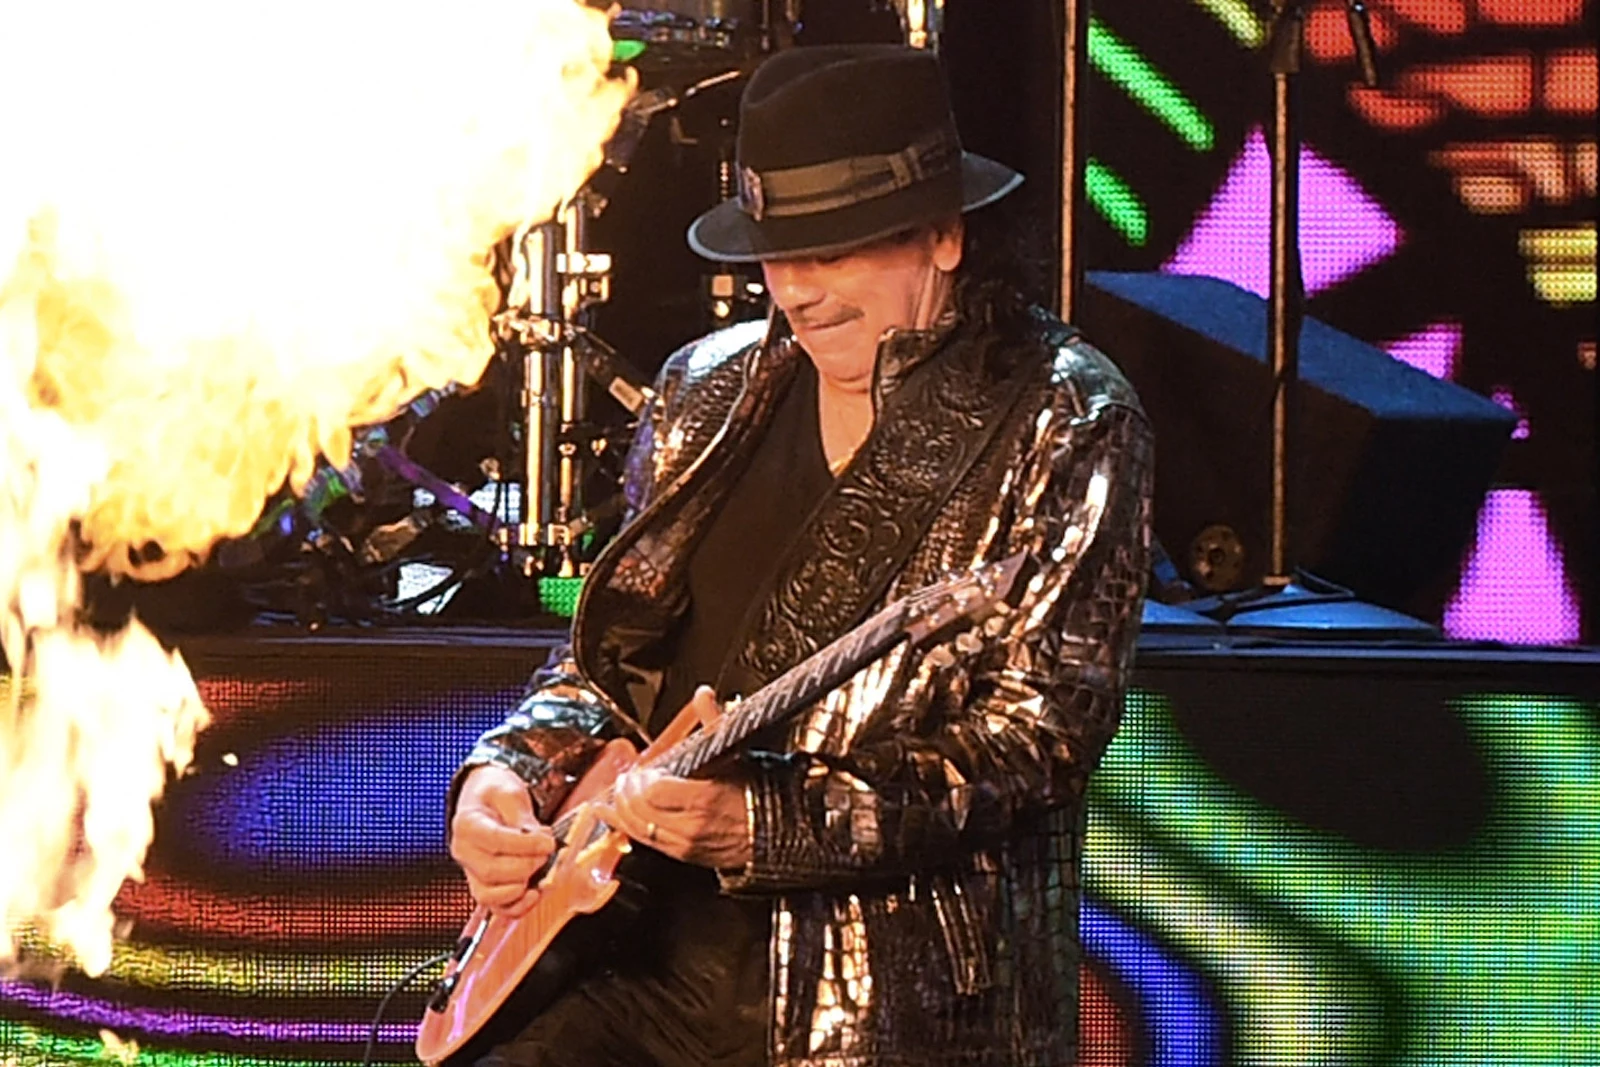 Carlos Santana Returning To Las Vegas In 2021; Tour With Earth, Wind & Fire  Planned For 2022 - Pollstar News